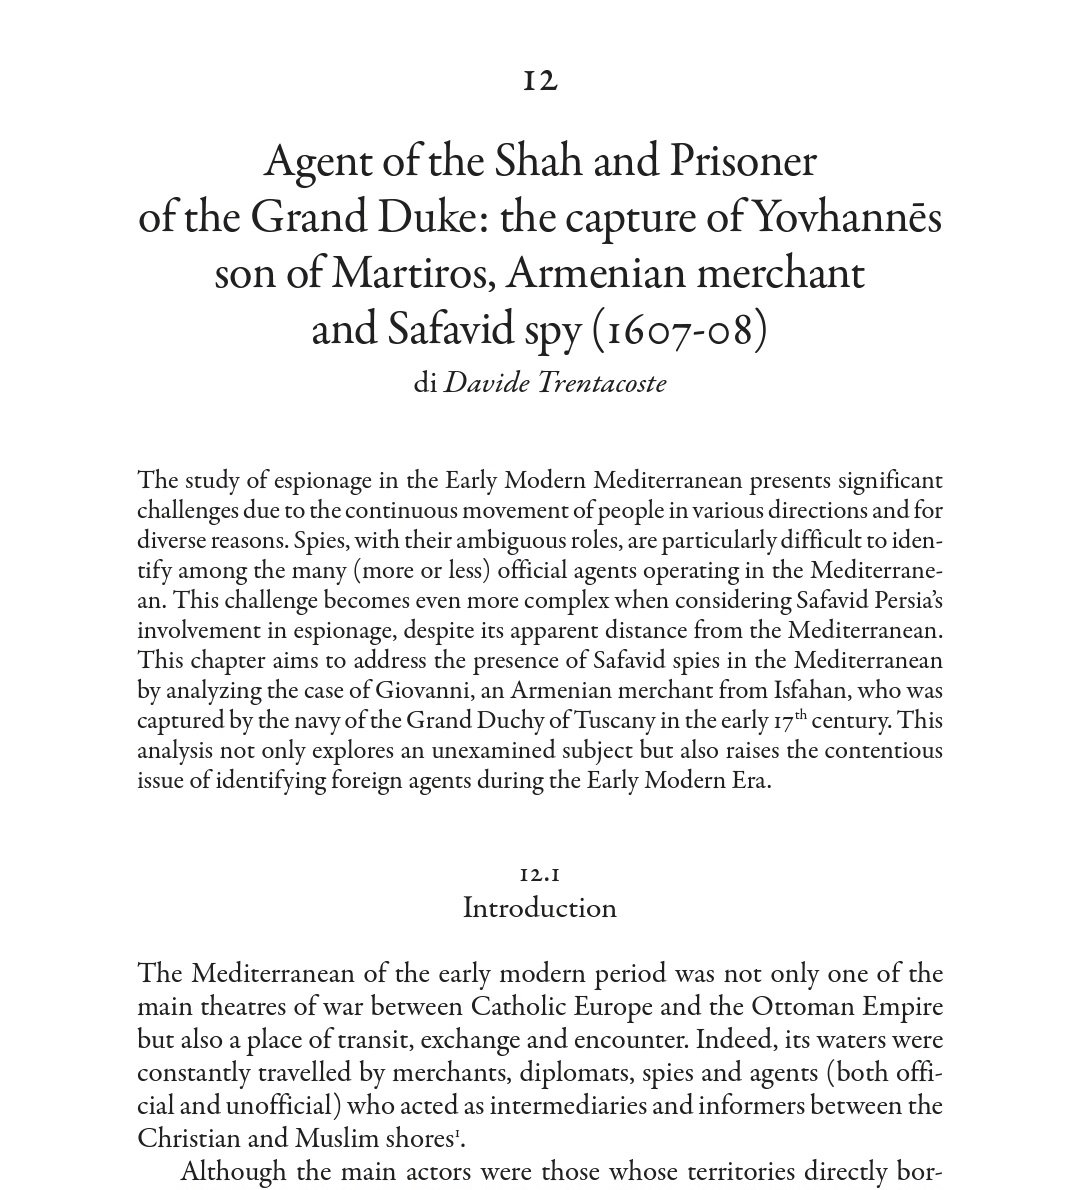 Coming out in just a few months! 

#emdiplomacy #mediterraneanhistory #safavid #armenianhistory #modernhistory